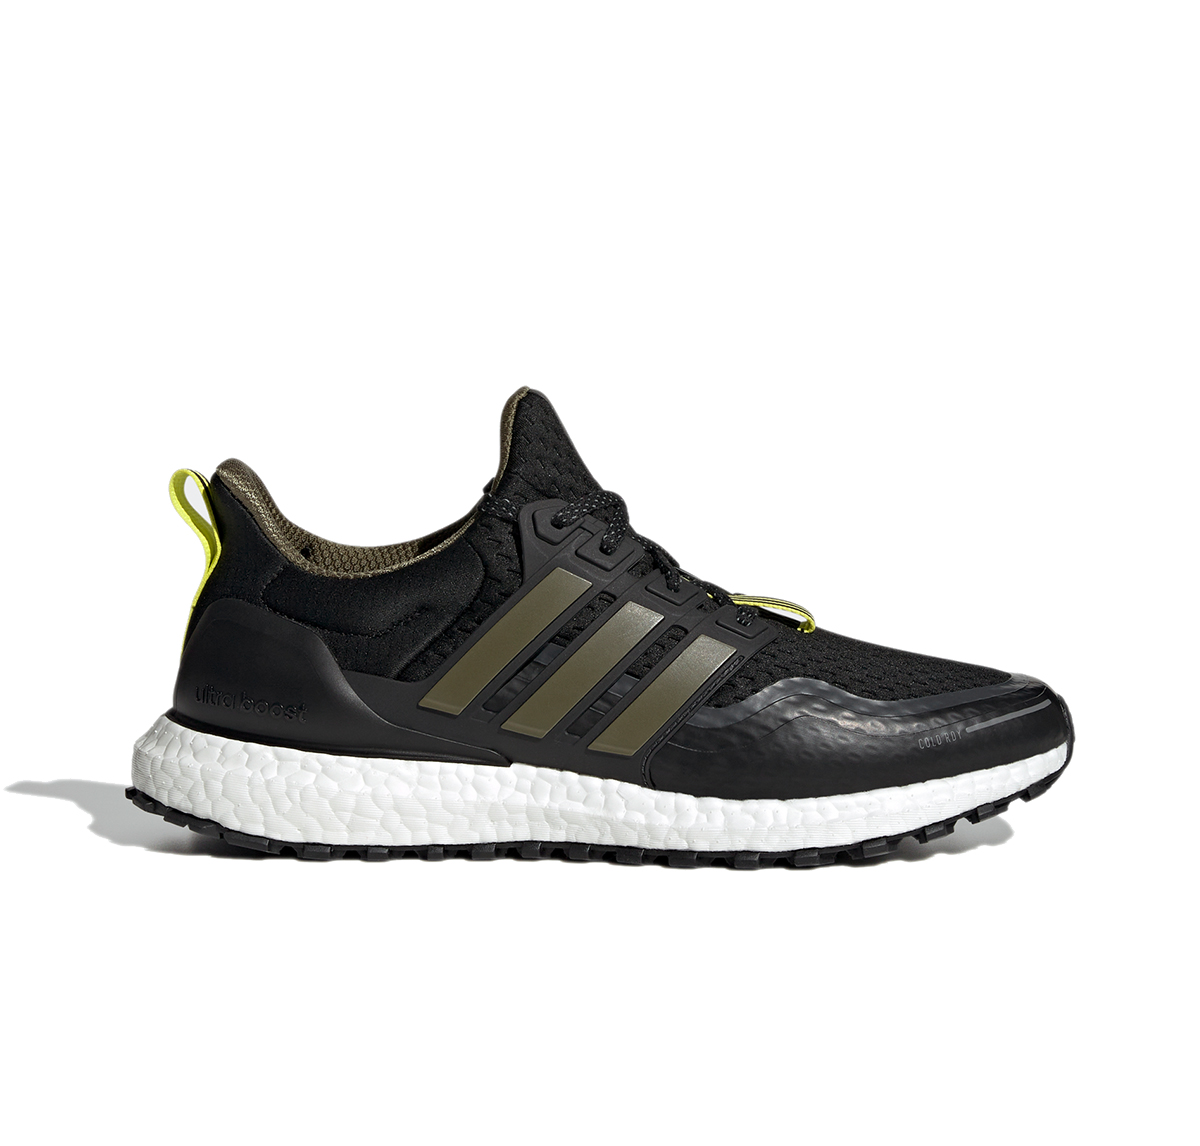 adidas Ultraboost Cold Ready DNA - Primeblue - Black Olive outside